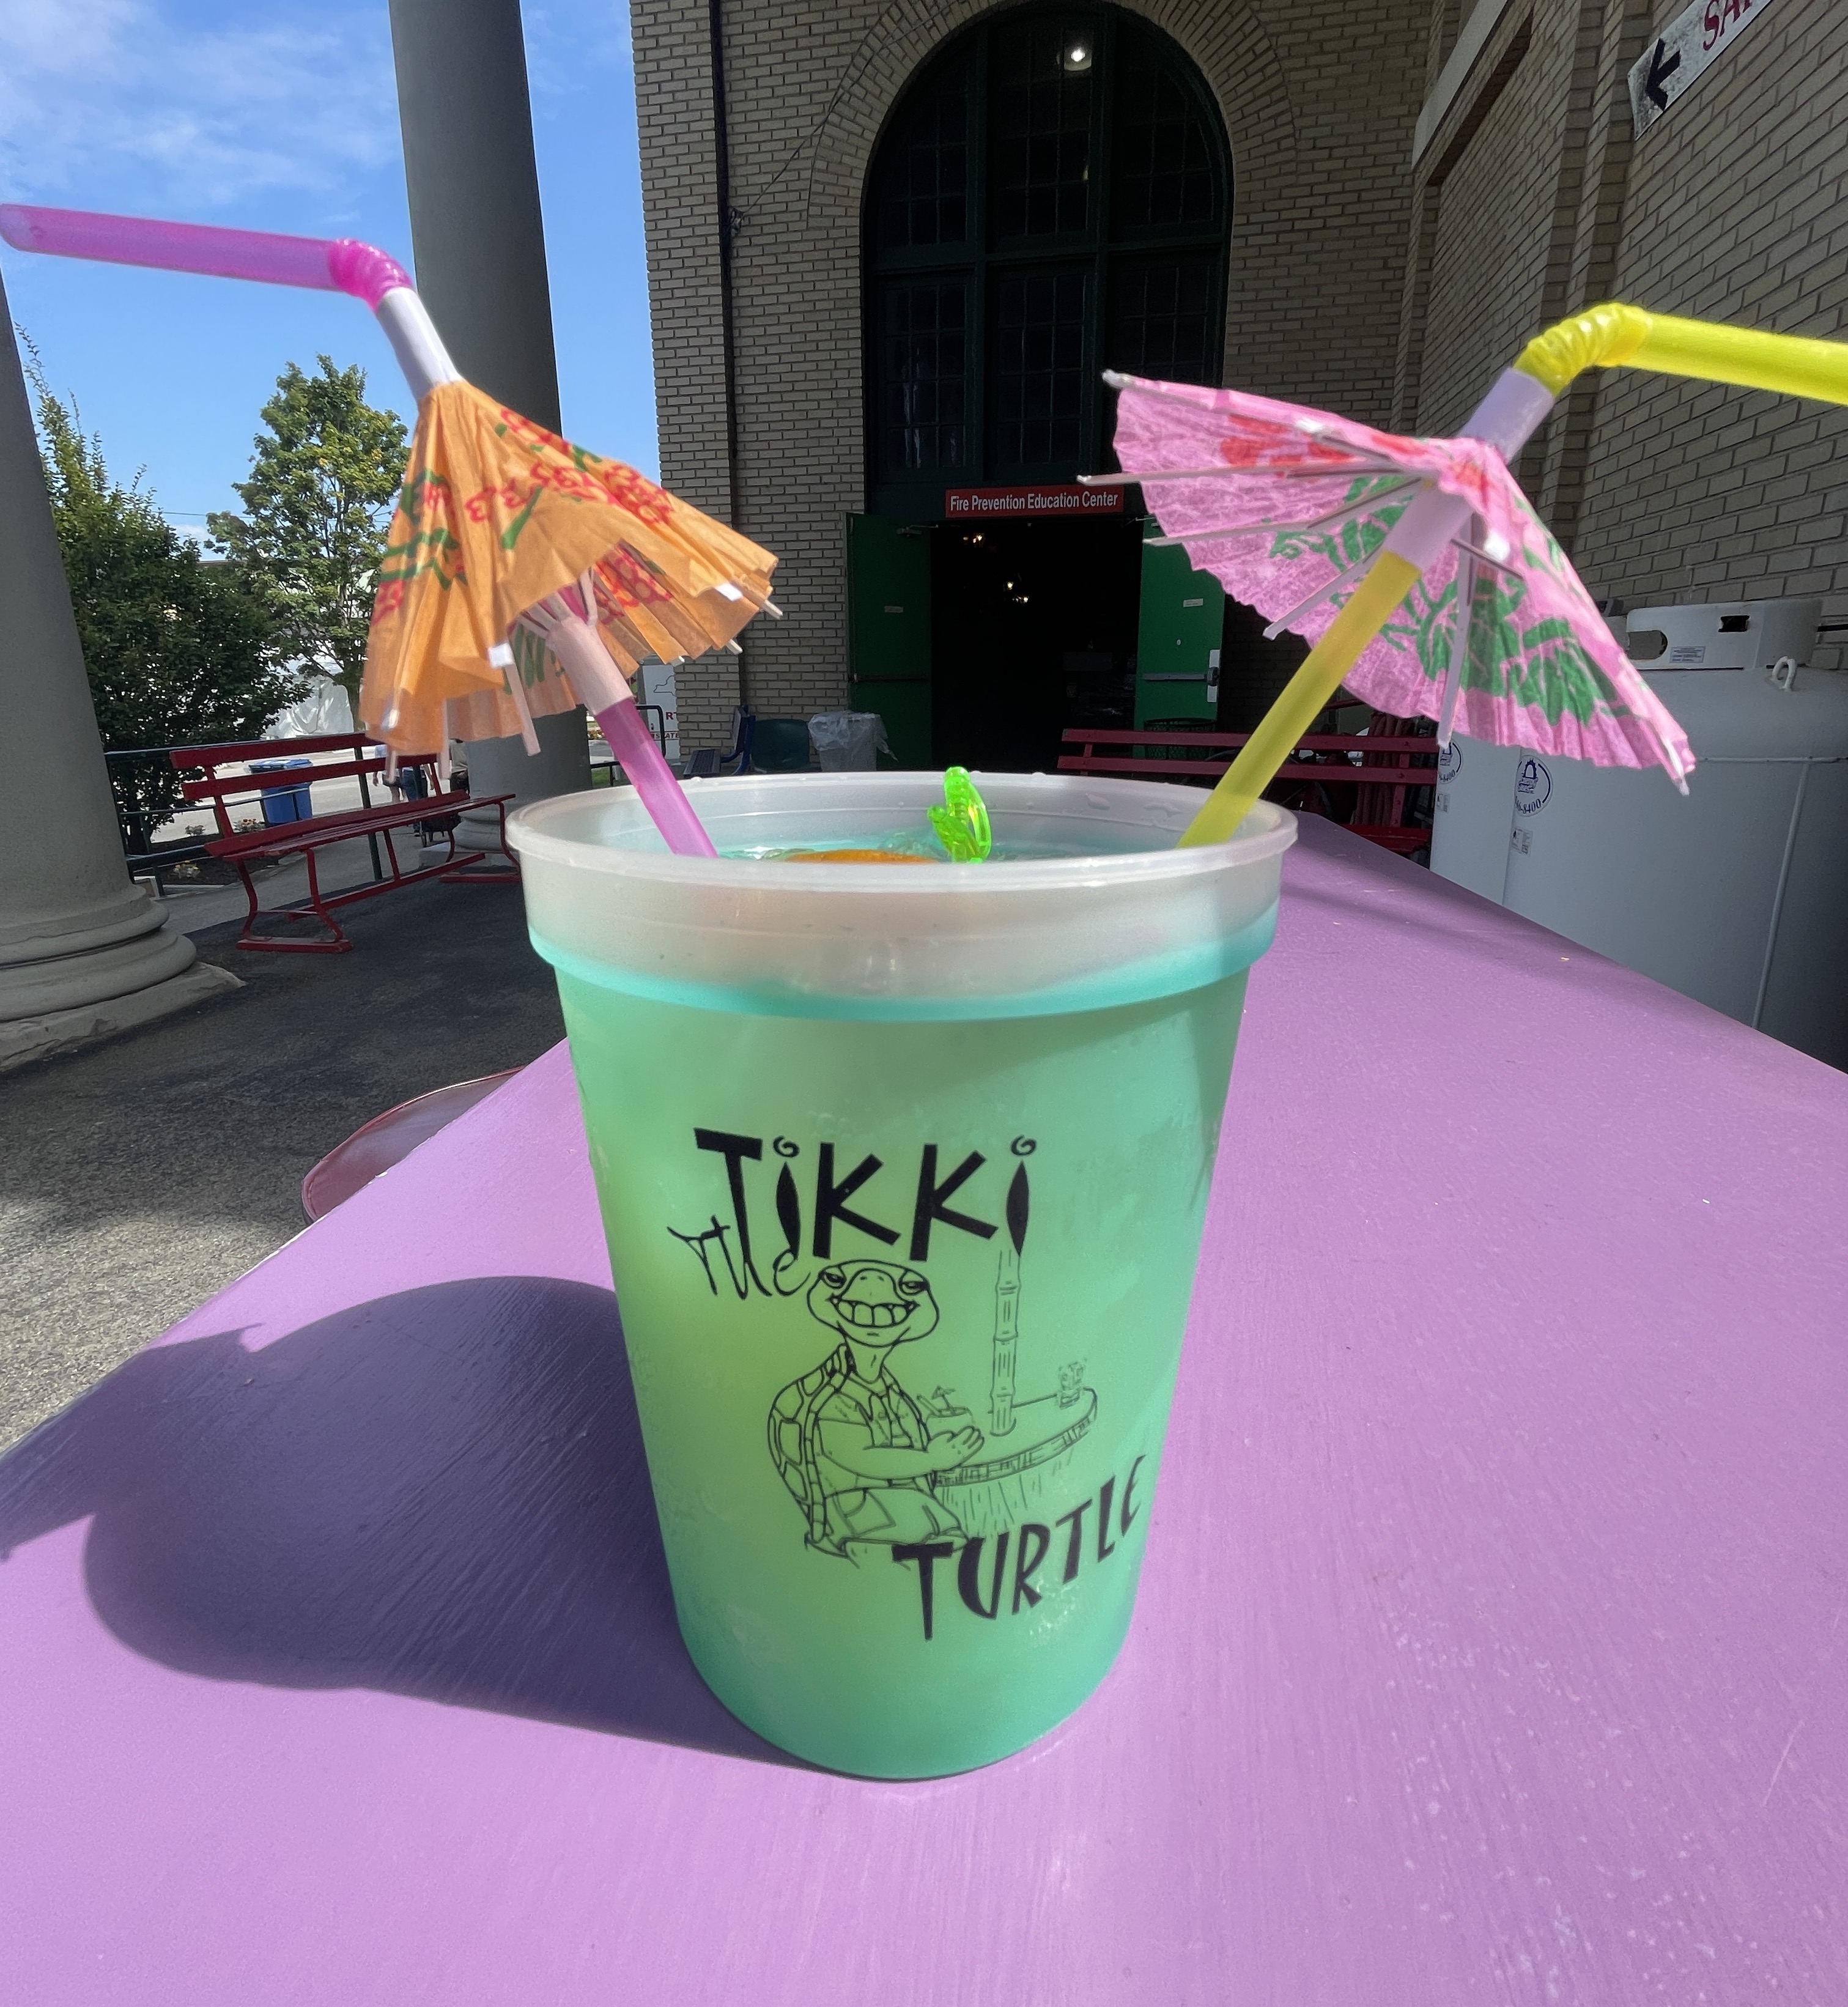 The Tikki Torture is a delicious mixed cocktail at The New York State Fair's Tikki Turtle stand. It features vodka, coconut rum , peach schnapps, orange juice, sweet & sours mix and grenadine. It was served with lime, maraschino cherries and umbrella straws in a color-changing cup. (Katrina Tulloch)